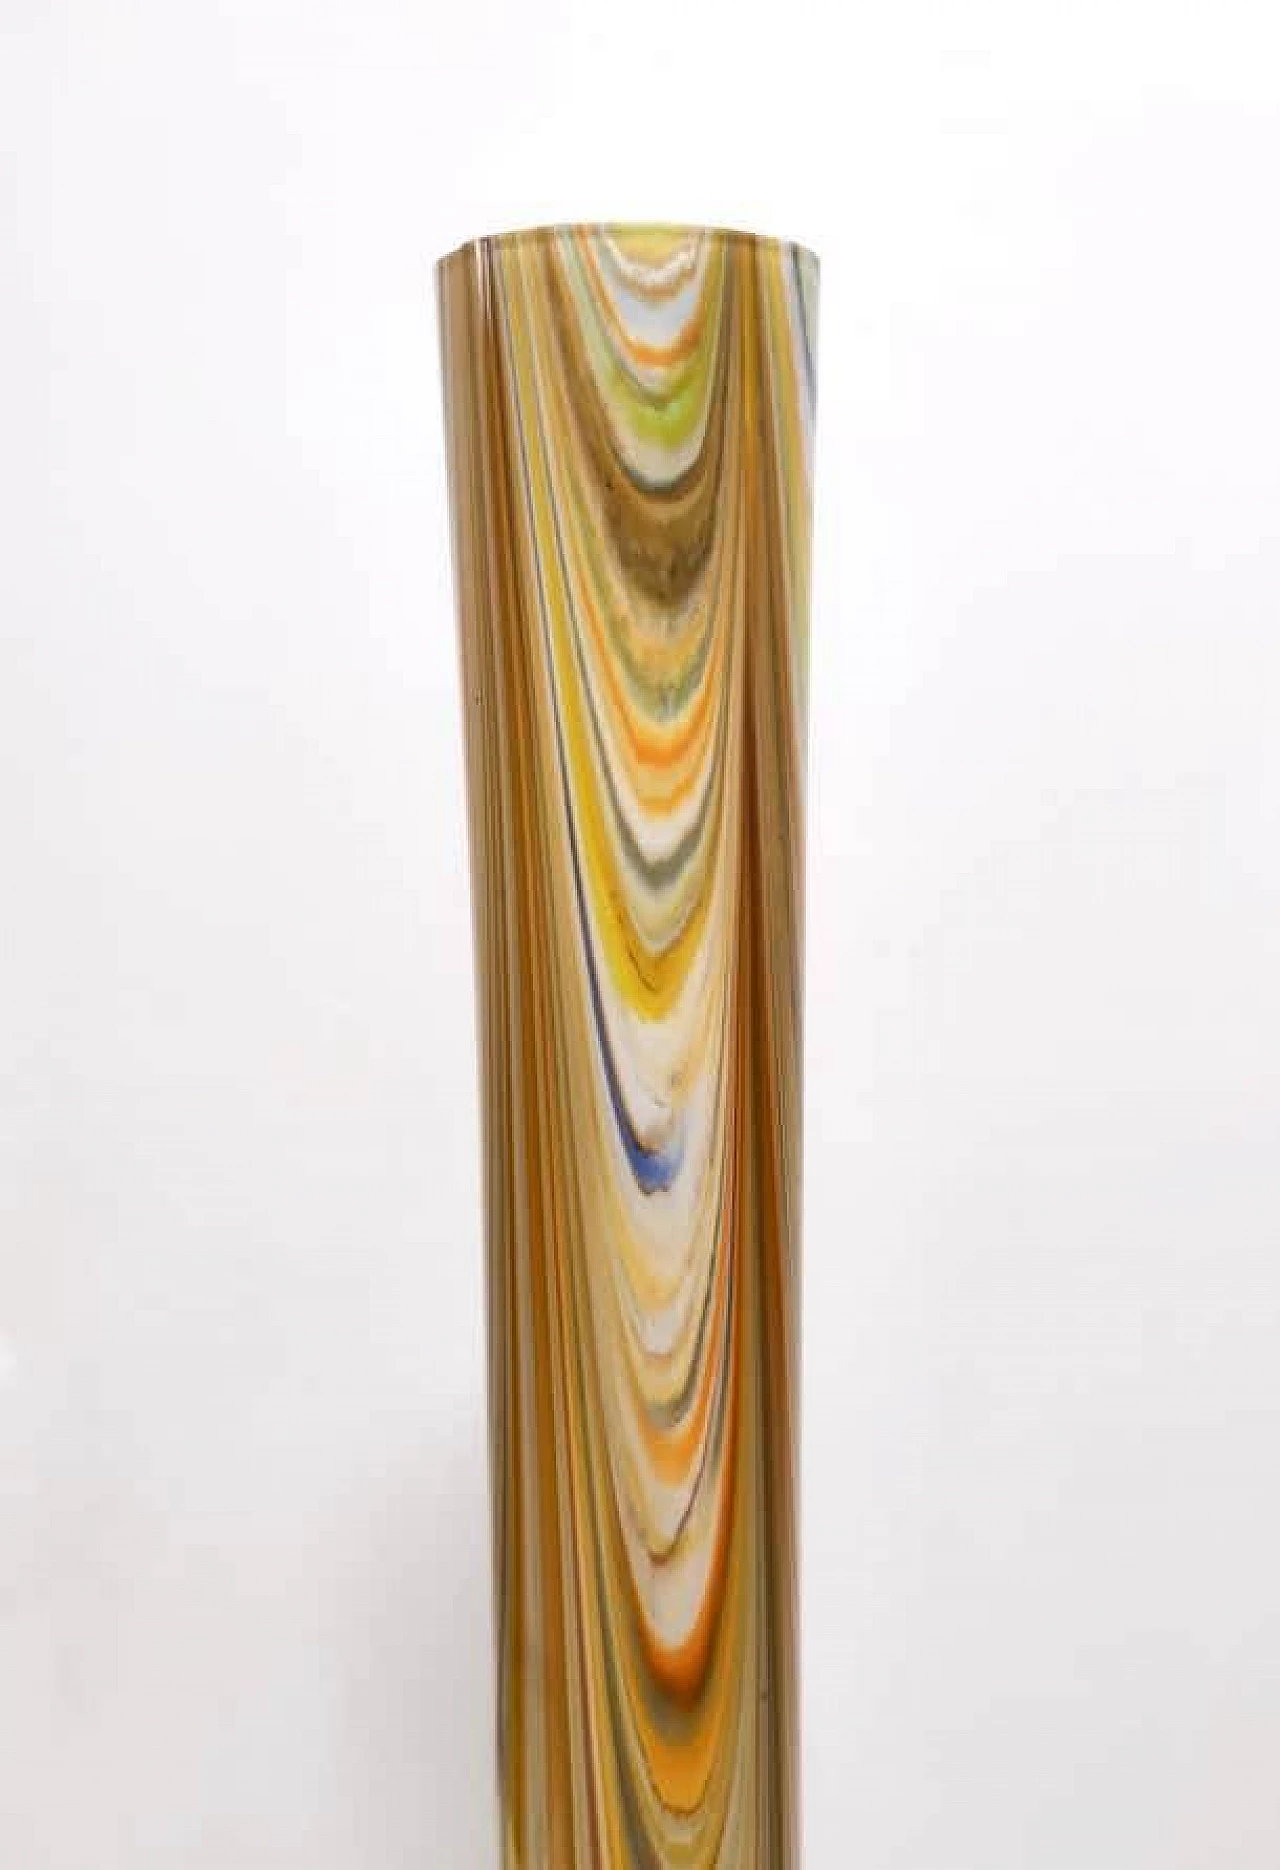 Phoenician orange glass vase attributed to Fratelli Toso, 1960s 18